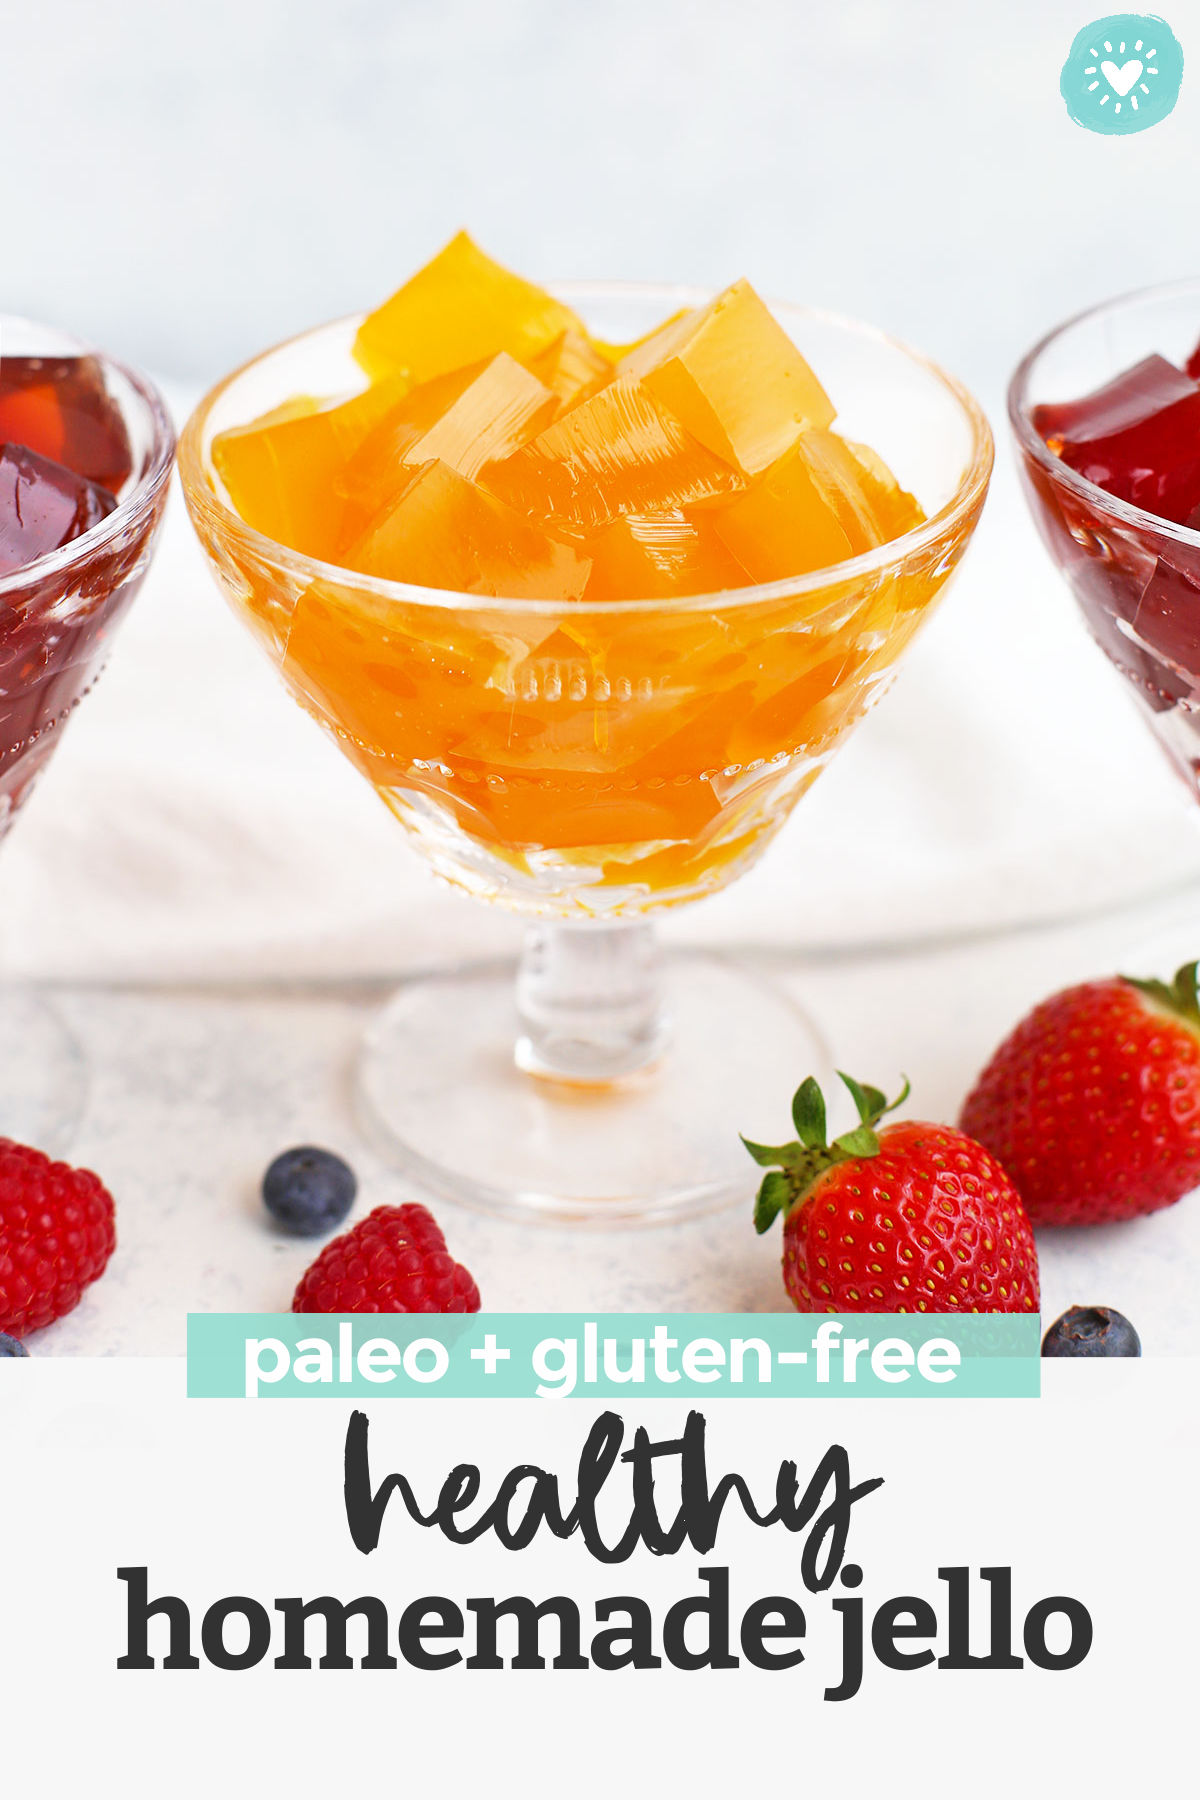 How to Make Healthy Homemade Jello - Yes, really! This homemade gelatin recipe is made from natural ingredients, and natural sweeteners, without any dye or additives. (Dairy free, gluten free & paleo approved!) // paleo jello // homemade jello recipe // homemade gelatin recipe // healthy gelatin #jello #gelatin #healthysnack #healthytreat